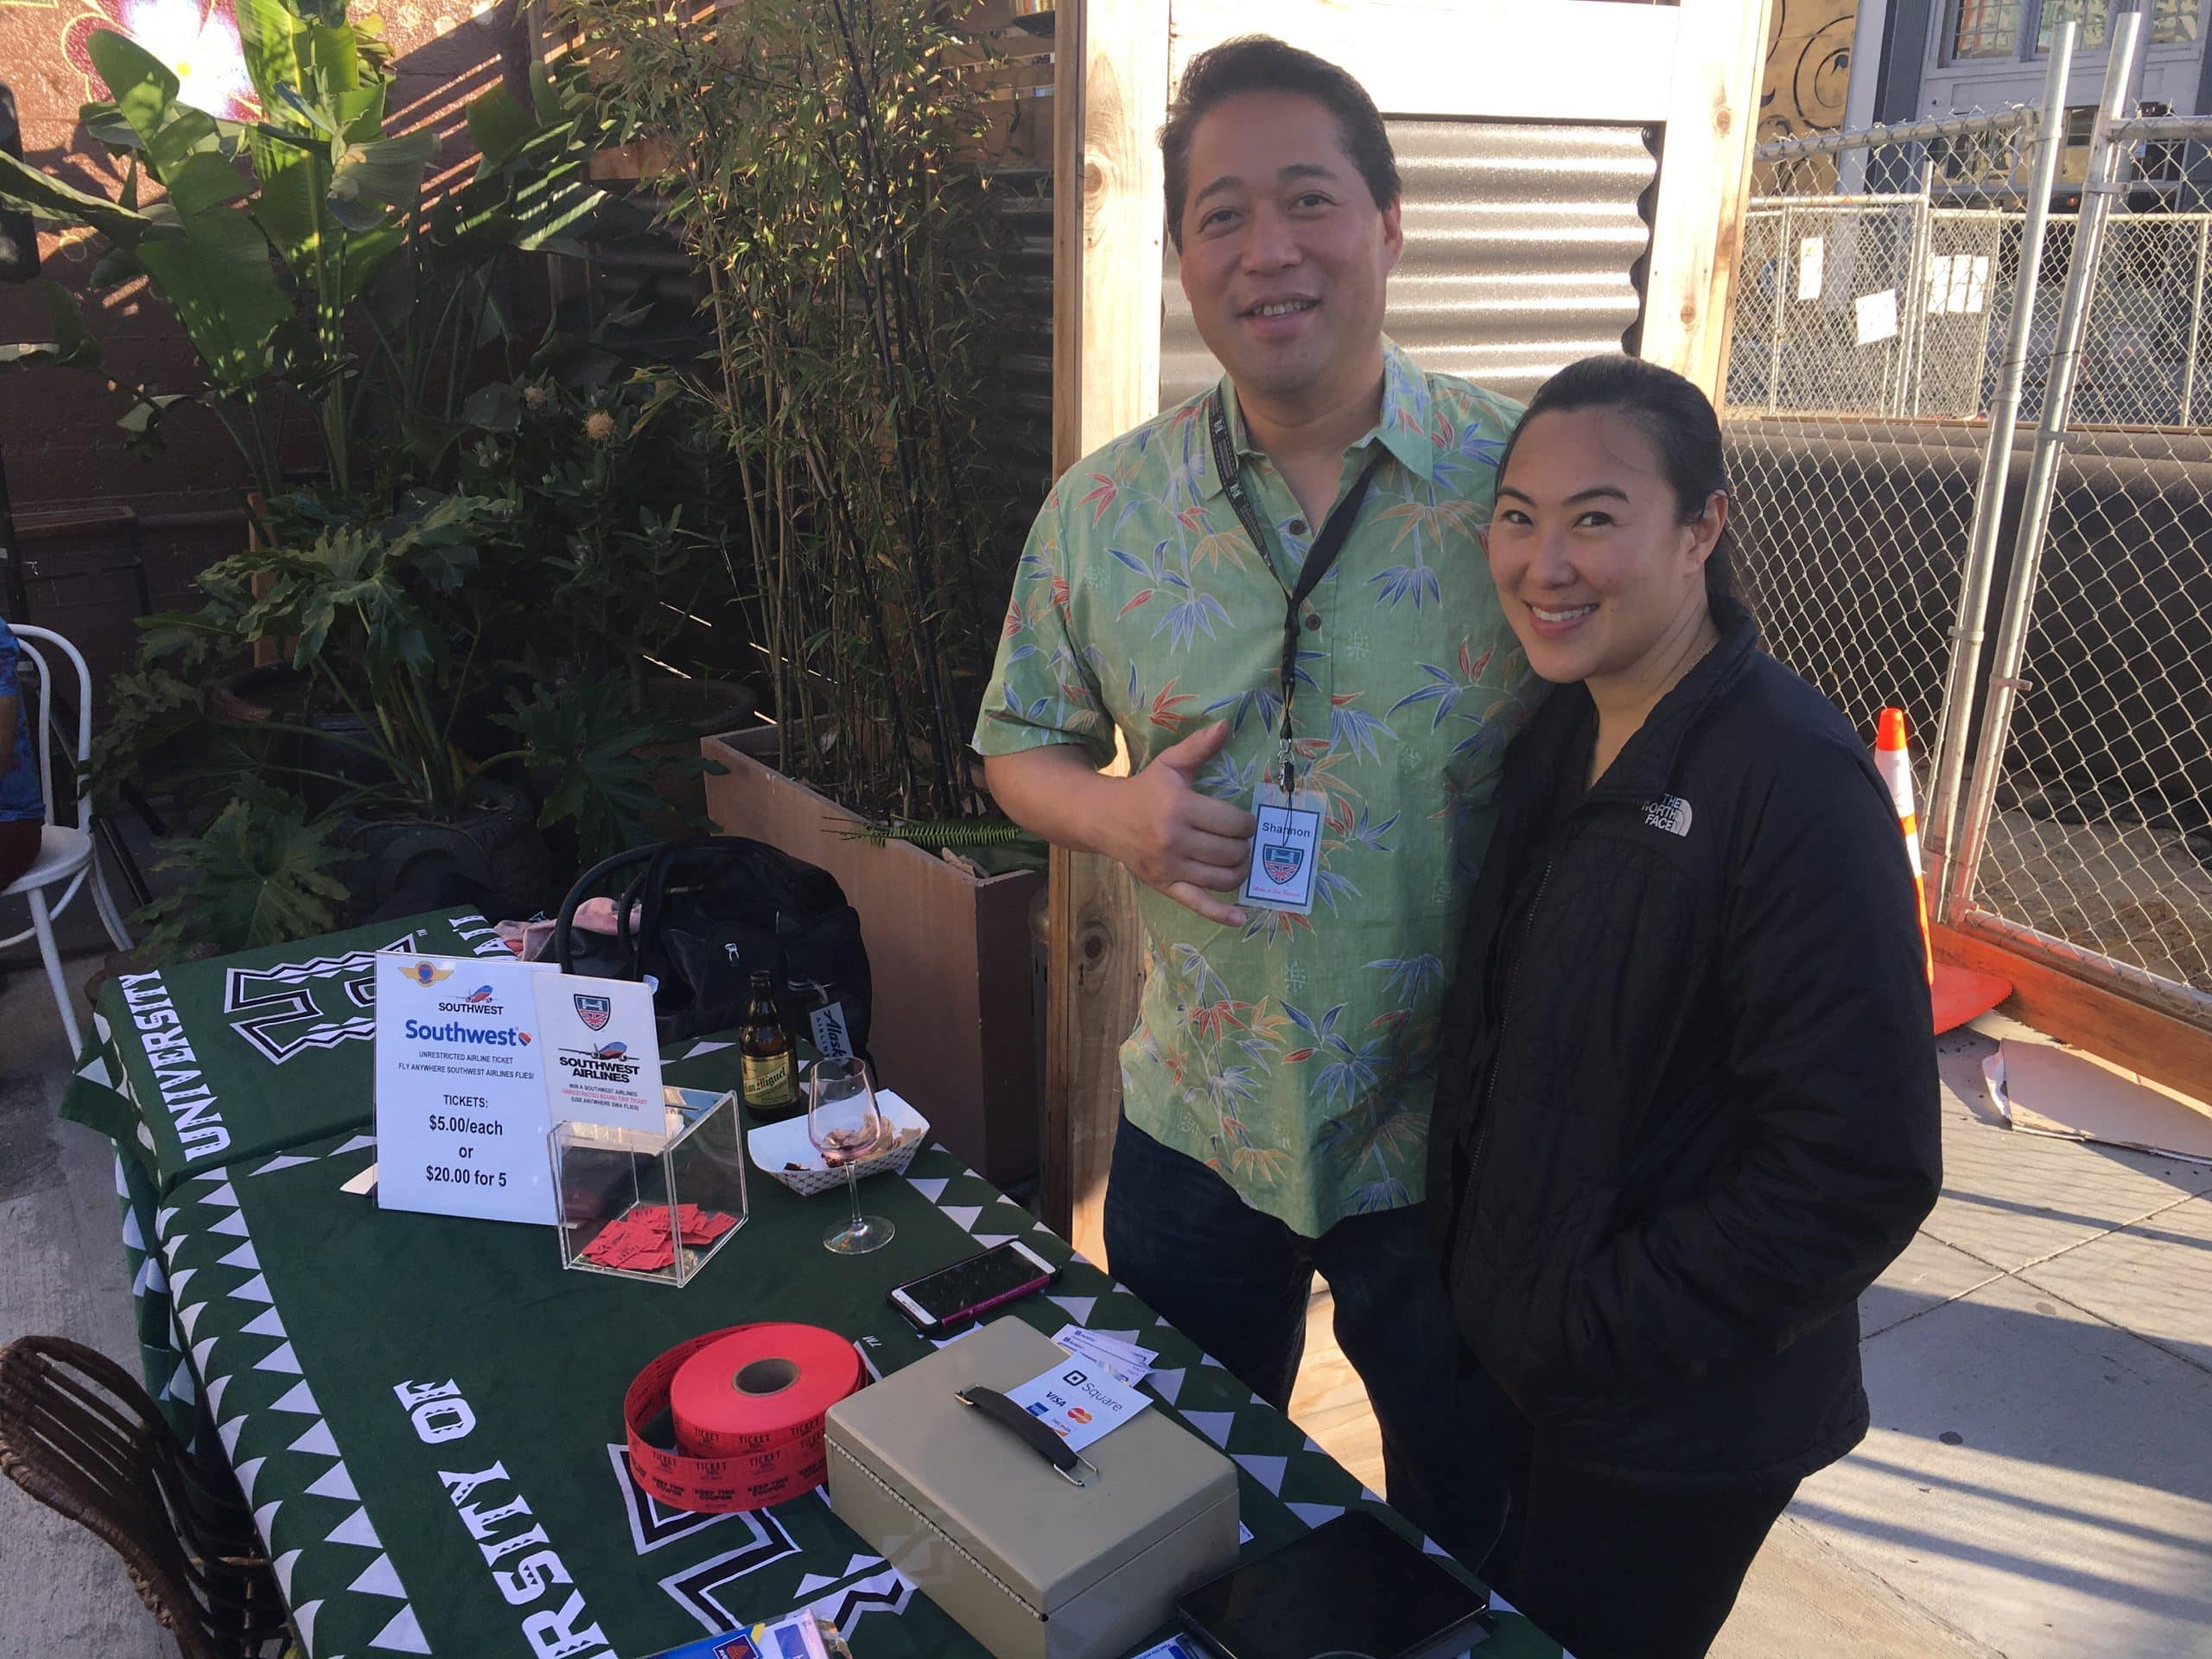 Hawaii Chamber of Commerce of Northern California business mixer in SOMA